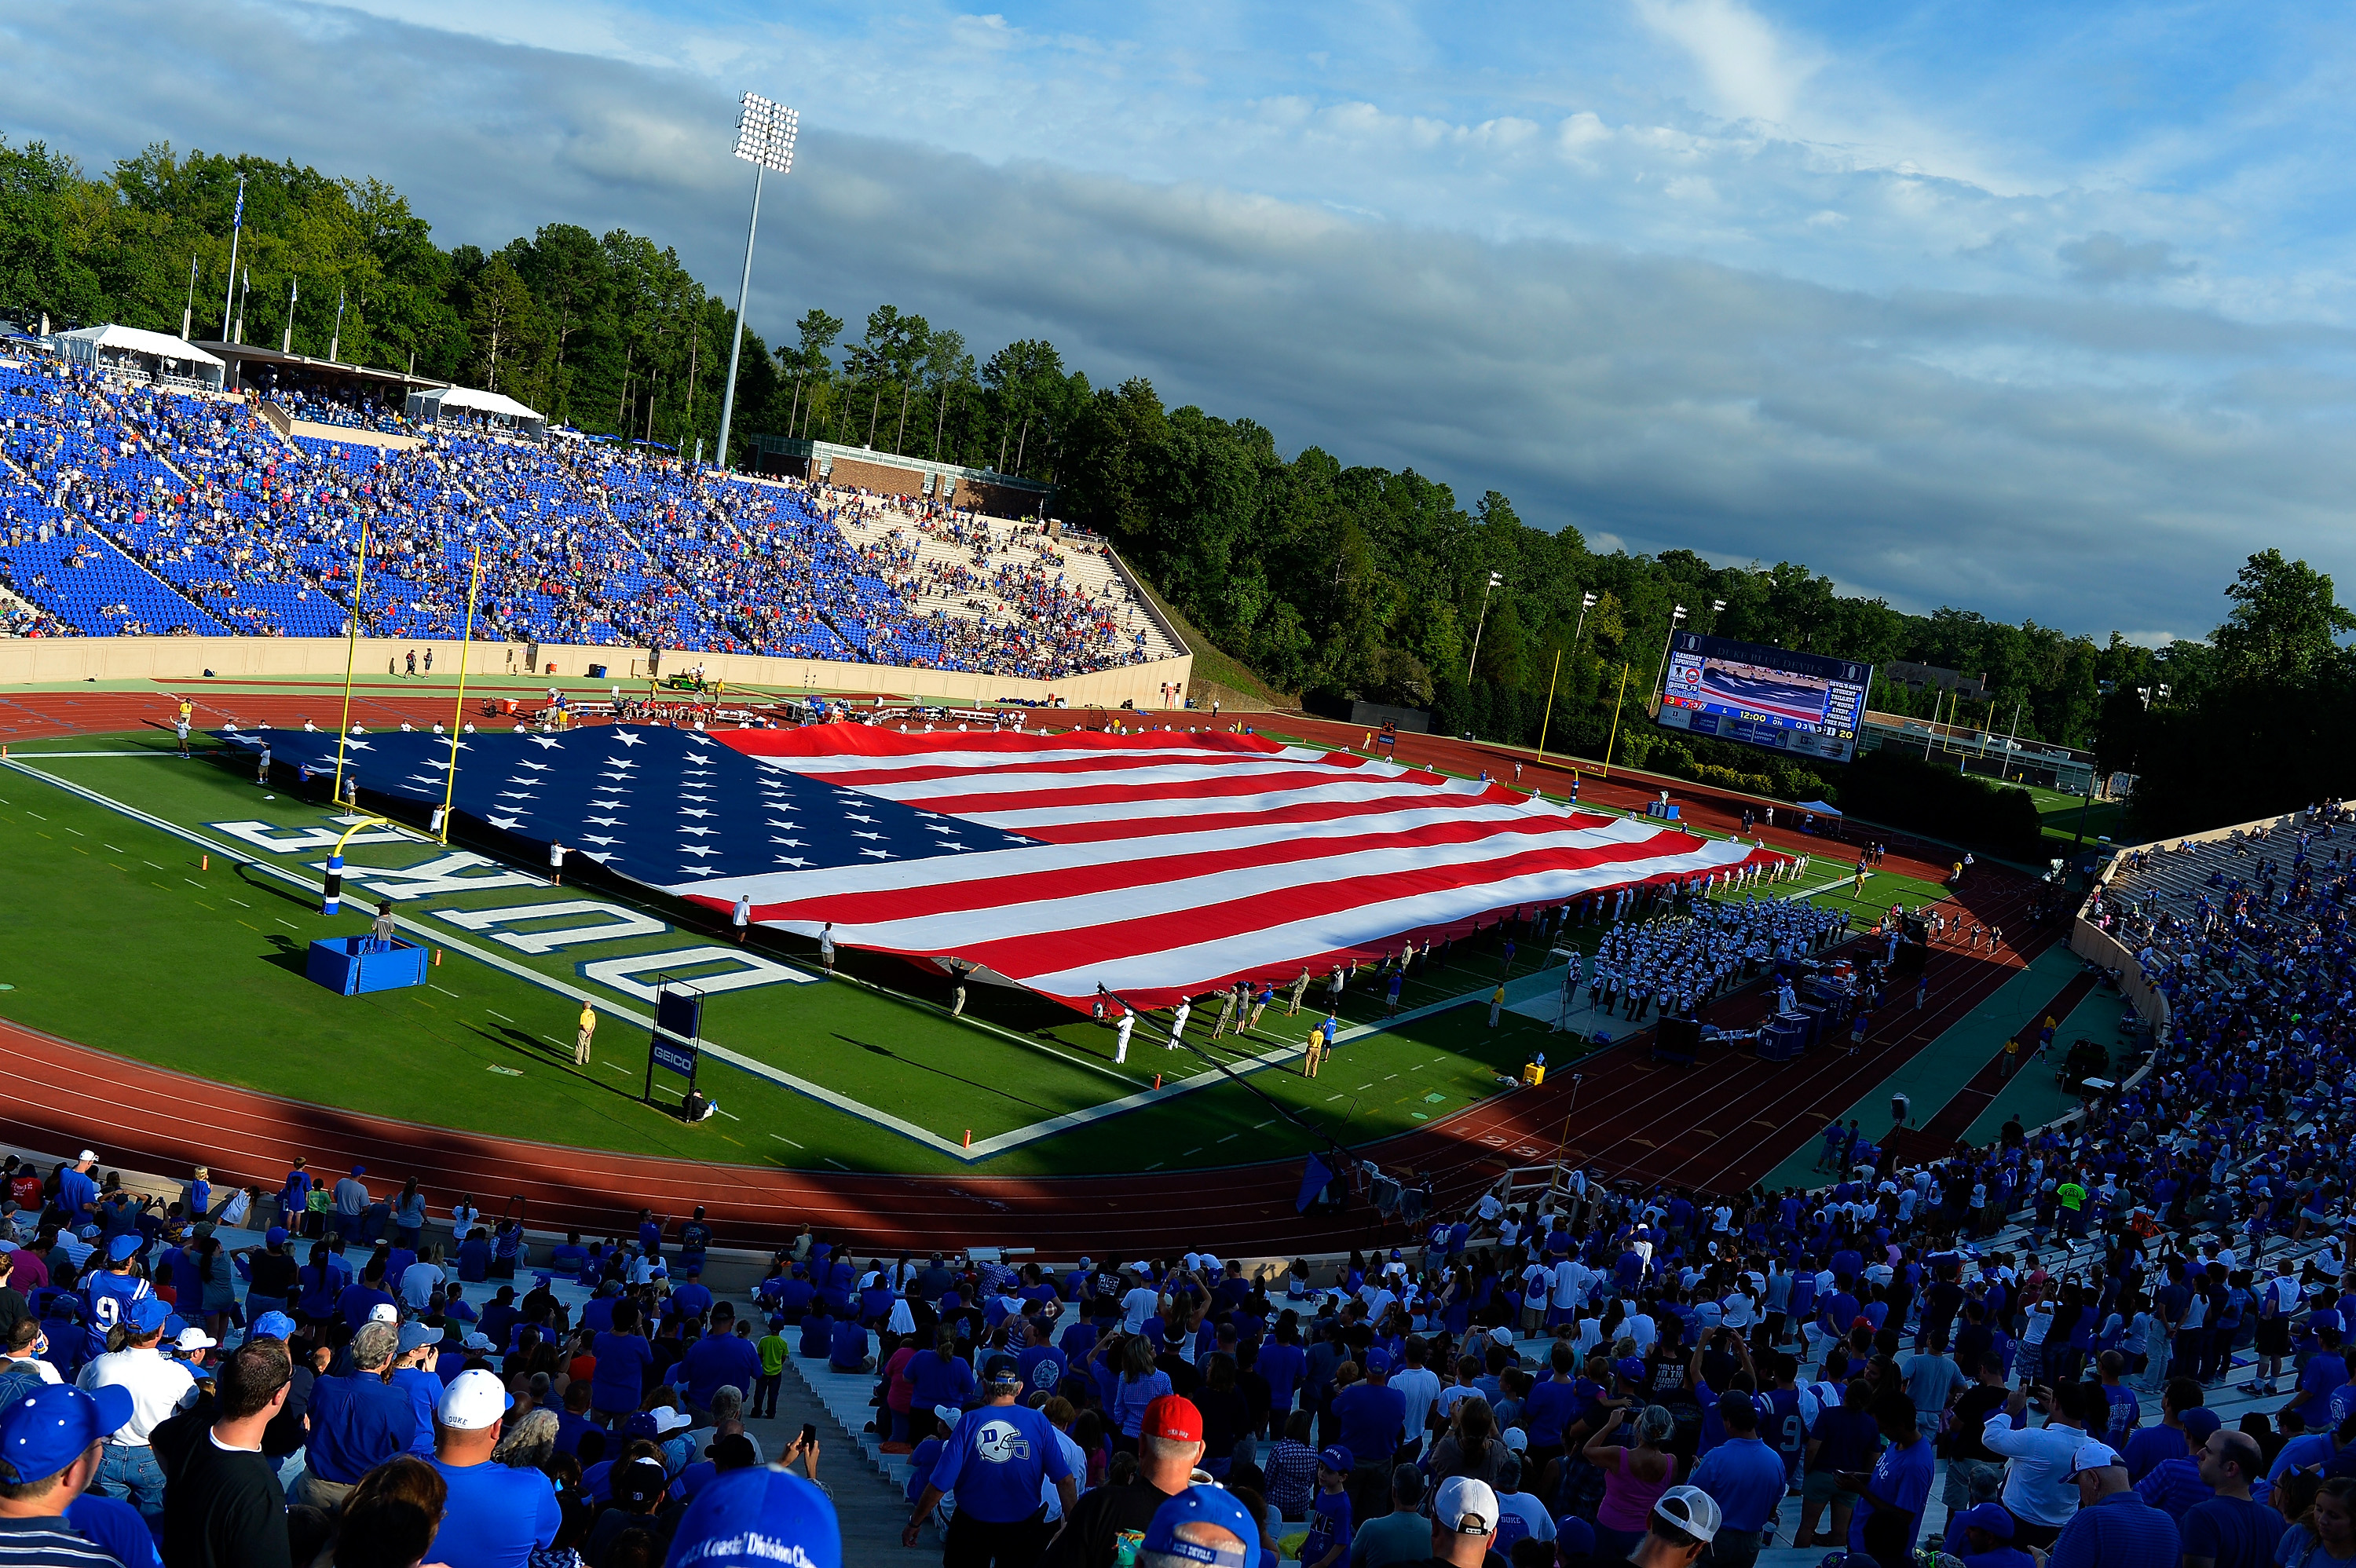 A stadium-sized American flag is displayed for Military Appreciation Day during halftime of the game between the Kansas Jayhawks and the Duke Blue Devils at Wallace Wade Stadium on September 13, 2014 in Durham, North Carolina. (Grant Halverson&mdash;Getty Images)